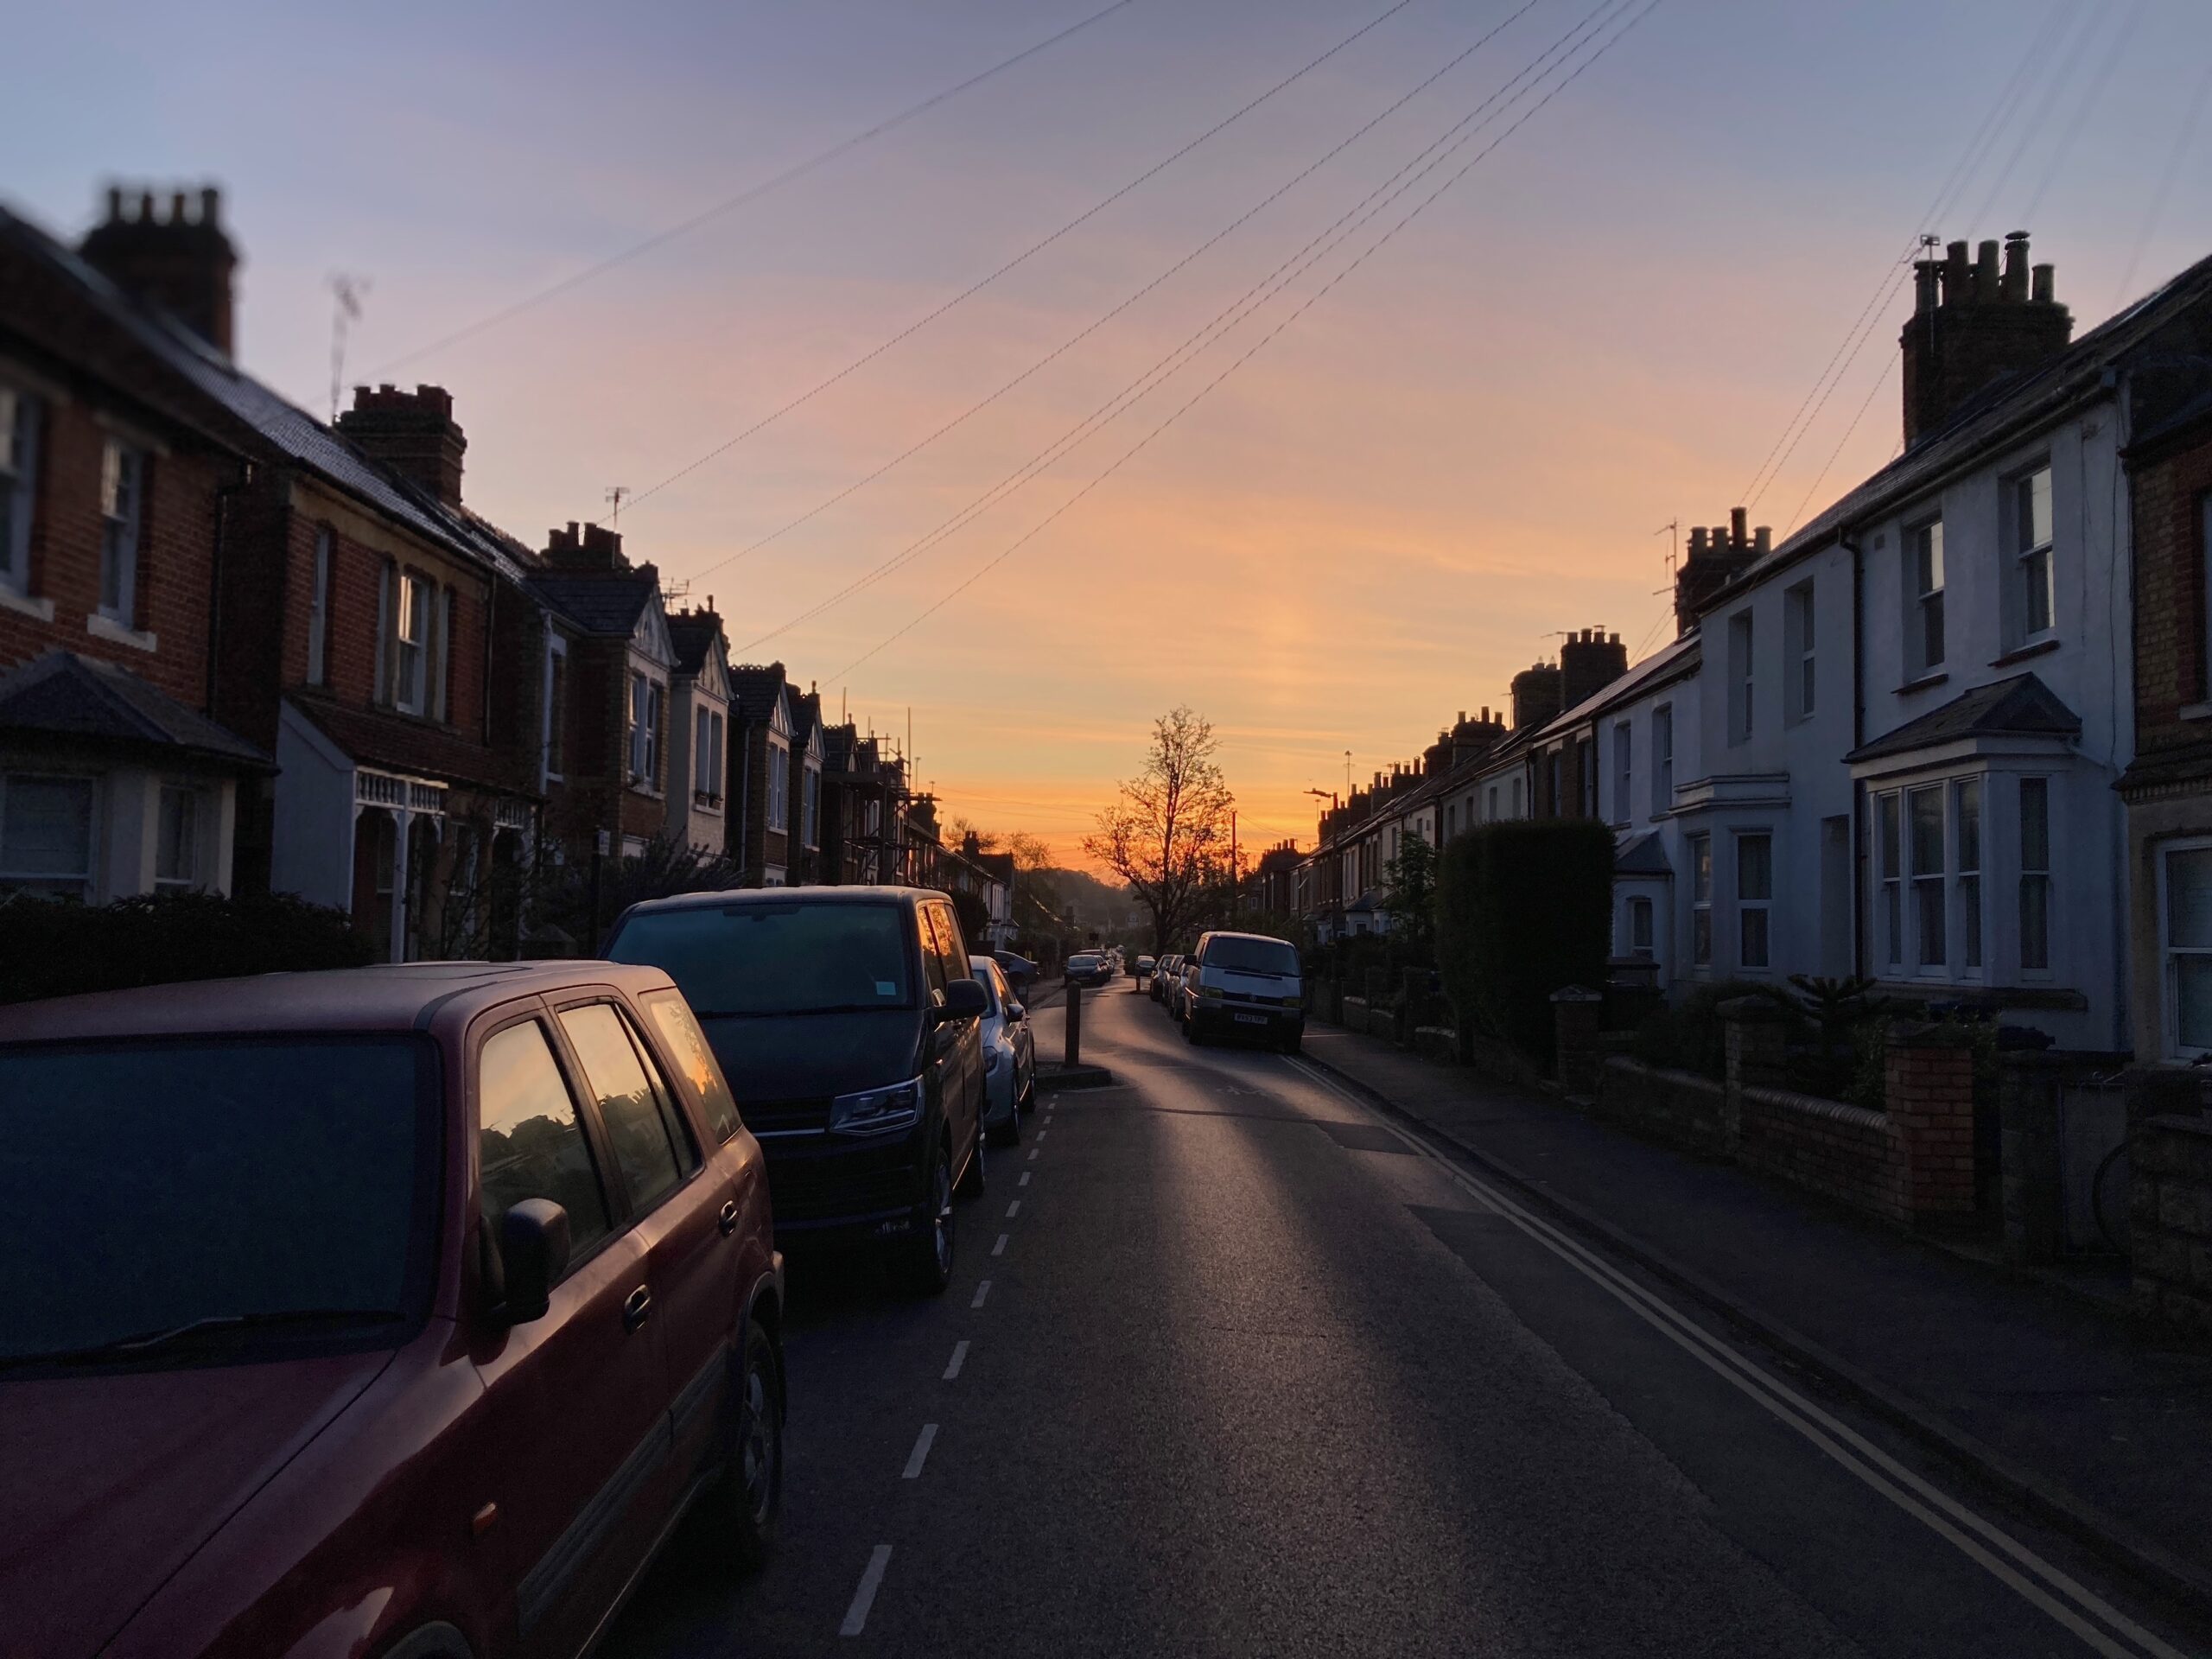 East-facing view of morning sky, streaked with pink-orange,  down an Oxford road lined by terraced houses, with the silhouette of a bare tree at the focal point.